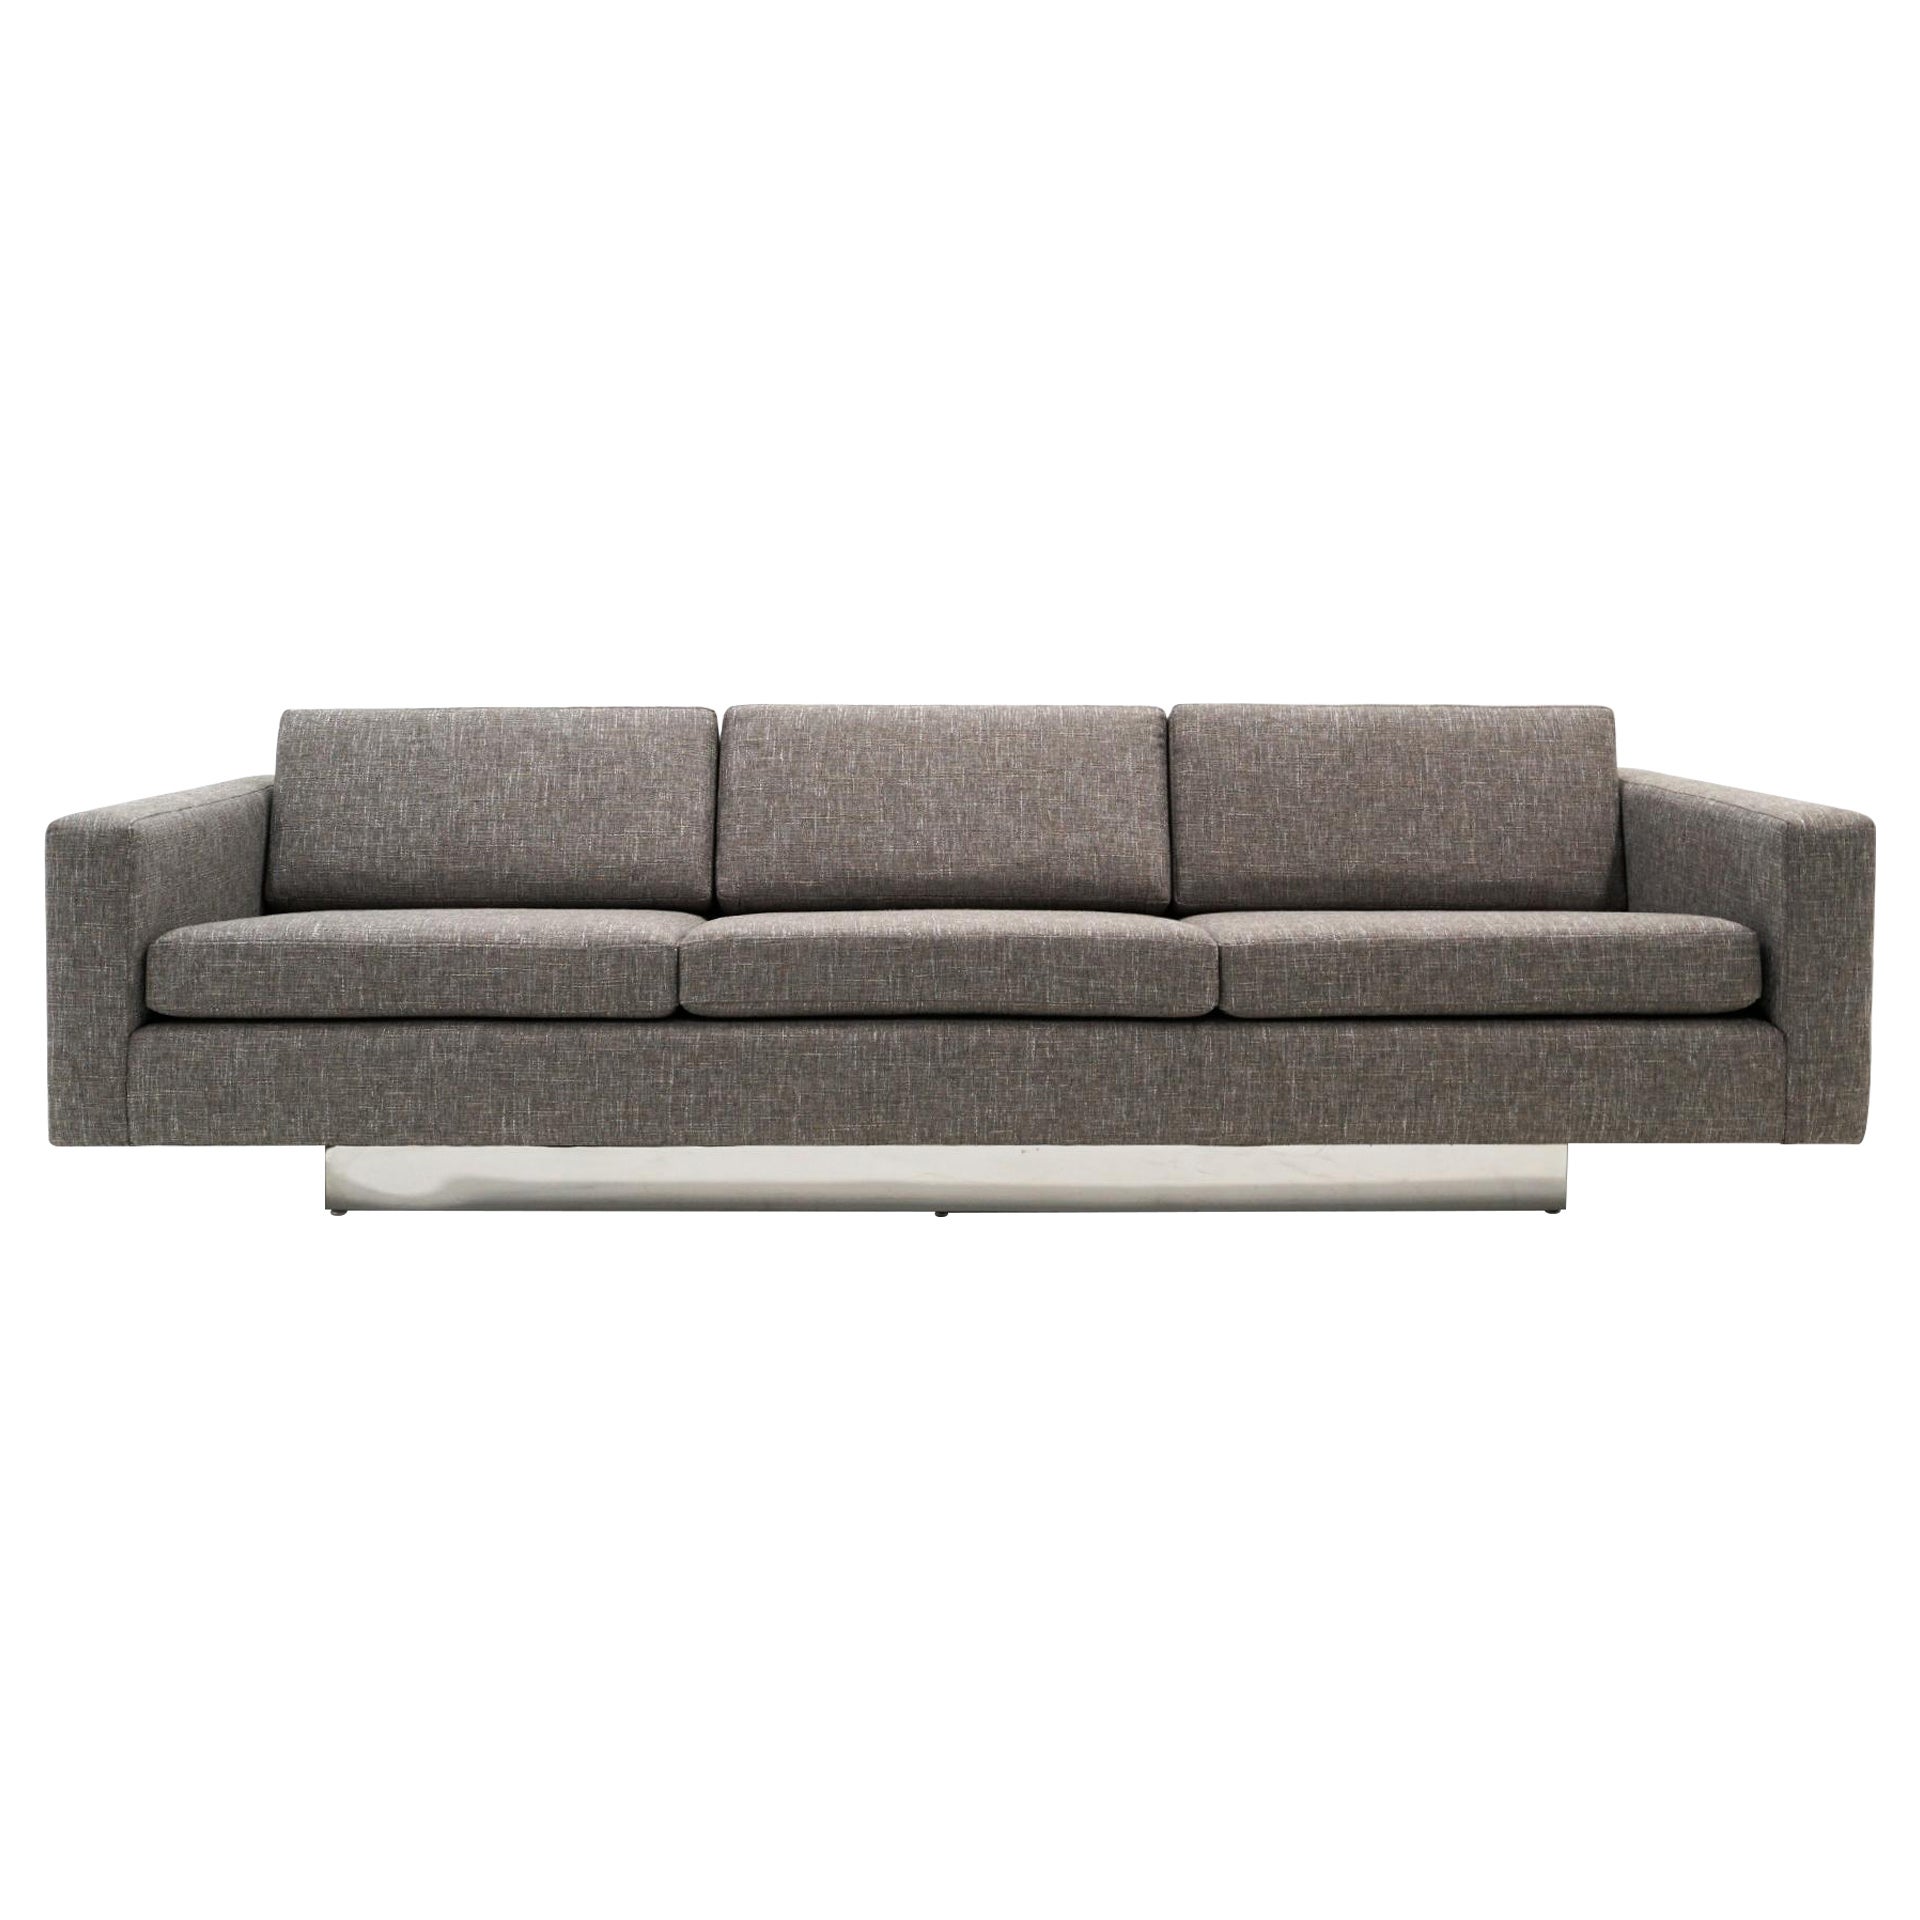 Gray Three Piece Sofa, Recessed Chrome Plinth Base. Attributed to Harvey Probber For Sale